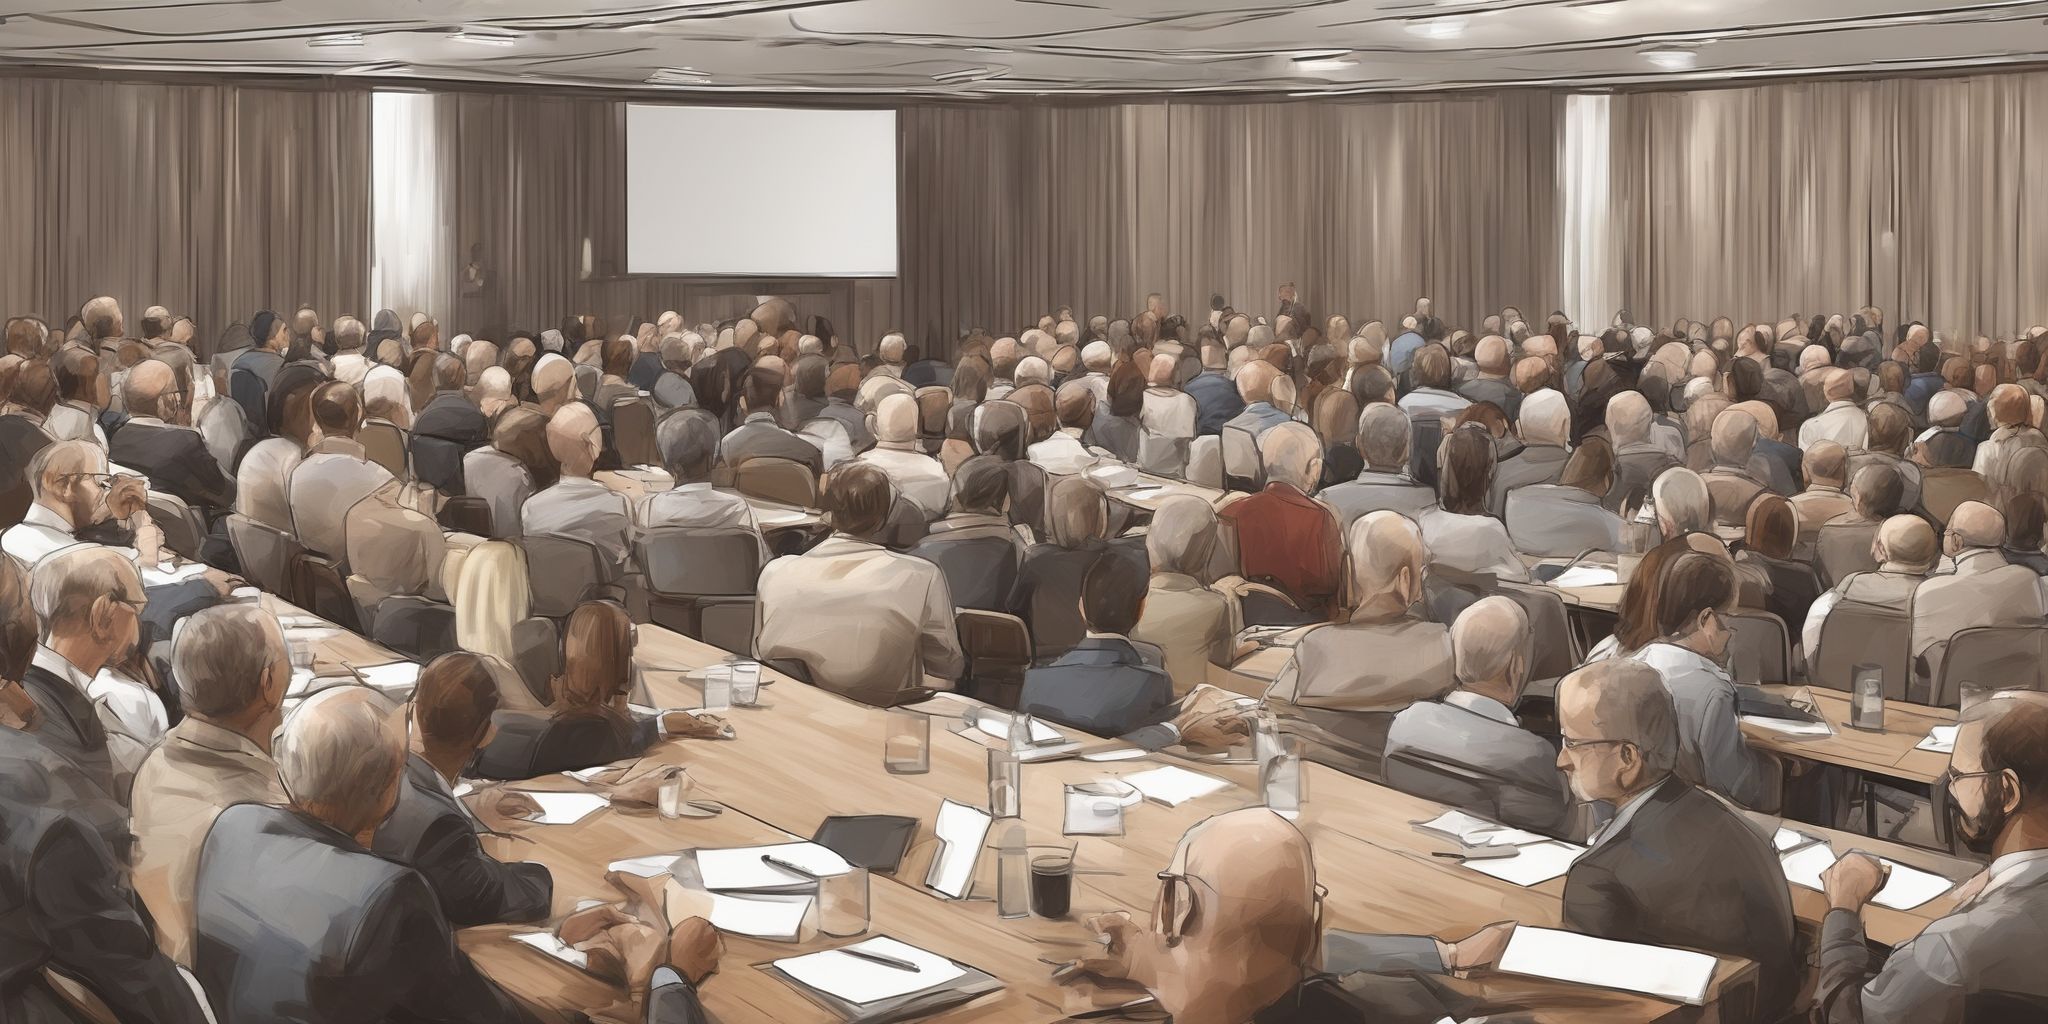 Conference  in realistic, photographic style